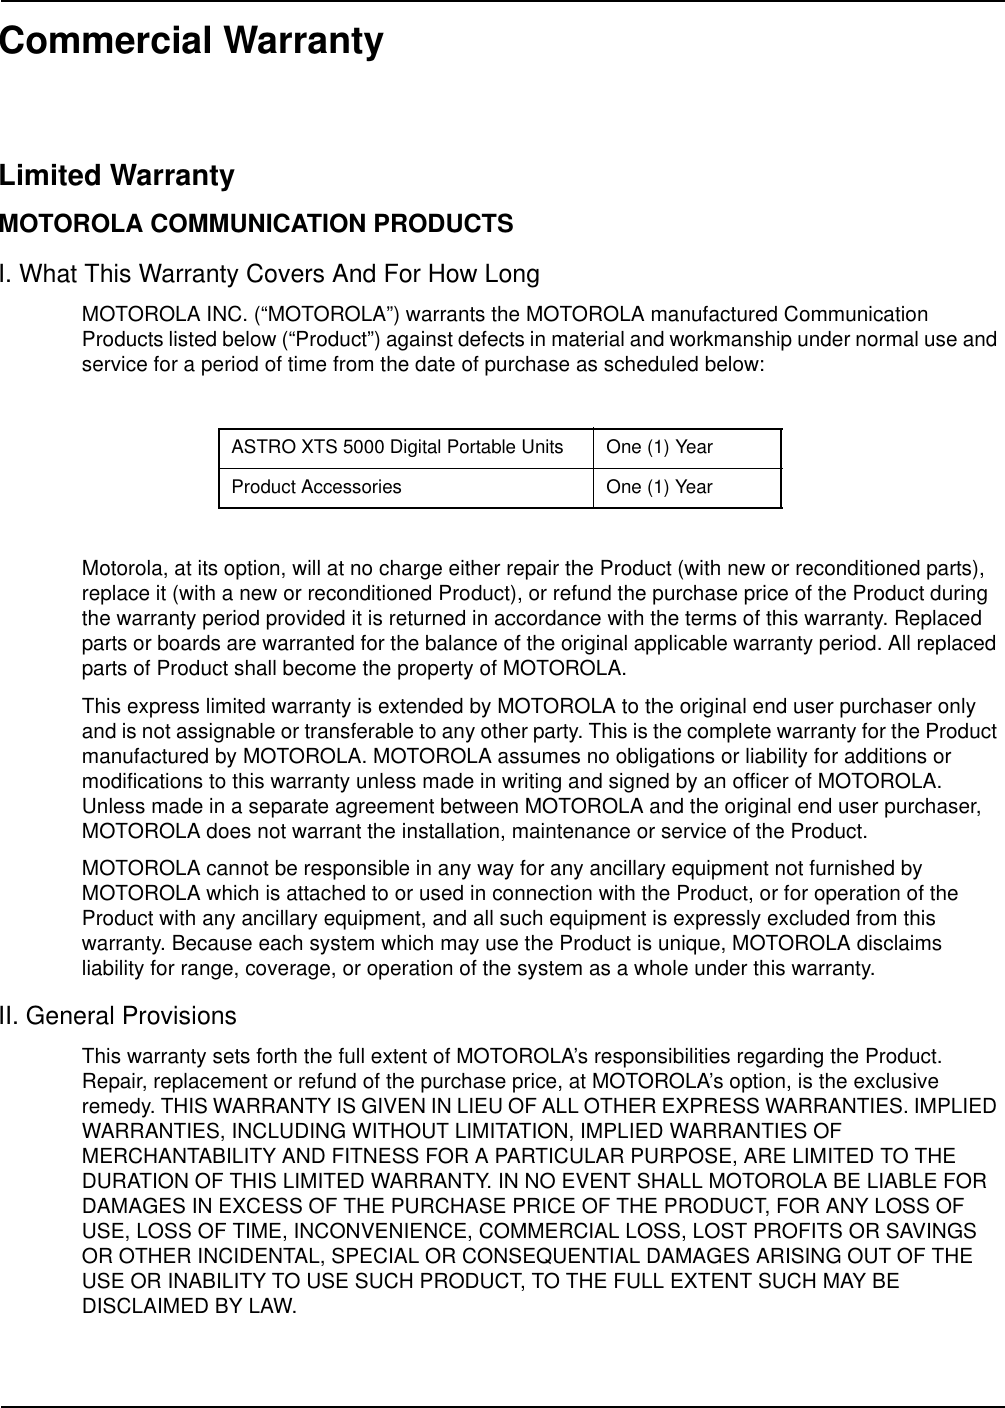 Commercial WarrantyLimited WarrantyMOTOROLA COMMUNICATION PRODUCTSI. What This Warranty Covers And For How LongMOTOROLA INC. (“MOTOROLA”) warrants the MOTOROLA manufactured Communication Products listed below (“Product”) against defects in material and workmanship under normal use and service for a period of time from the date of purchase as scheduled below:Motorola, at its option, will at no charge either repair the Product (with new or reconditioned parts), replace it (with a new or reconditioned Product), or refund the purchase price of the Product during the warranty period provided it is returned in accordance with the terms of this warranty. Replaced parts or boards are warranted for the balance of the original applicable warranty period. All replaced parts of Product shall become the property of MOTOROLA.This express limited warranty is extended by MOTOROLA to the original end user purchaser only and is not assignable or transferable to any other party. This is the complete warranty for the Product manufactured by MOTOROLA. MOTOROLA assumes no obligations or liability for additions or modifications to this warranty unless made in writing and signed by an officer of MOTOROLA. Unless made in a separate agreement between MOTOROLA and the original end user purchaser, MOTOROLA does not warrant the installation, maintenance or service of the Product.MOTOROLA cannot be responsible in any way for any ancillary equipment not furnished by MOTOROLA which is attached to or used in connection with the Product, or for operation of the Product with any ancillary equipment, and all such equipment is expressly excluded from this warranty. Because each system which may use the Product is unique, MOTOROLA disclaims liability for range, coverage, or operation of the system as a whole under this warranty.II. General ProvisionsThis warranty sets forth the full extent of MOTOROLA’s responsibilities regarding the Product. Repair, replacement or refund of the purchase price, at MOTOROLA’s option, is the exclusive remedy. THIS WARRANTY IS GIVEN IN LIEU OF ALL OTHER EXPRESS WARRANTIES. IMPLIED WARRANTIES, INCLUDING WITHOUT LIMITATION, IMPLIED WARRANTIES OF MERCHANTABILITY AND FITNESS FOR A PARTICULAR PURPOSE, ARE LIMITED TO THE DURATION OF THIS LIMITED WARRANTY. IN NO EVENT SHALL MOTOROLA BE LIABLE FOR DAMAGES IN EXCESS OF THE PURCHASE PRICE OF THE PRODUCT, FOR ANY LOSS OF USE, LOSS OF TIME, INCONVENIENCE, COMMERCIAL LOSS, LOST PROFITS OR SAVINGS OR OTHER INCIDENTAL, SPECIAL OR CONSEQUENTIAL DAMAGES ARISING OUT OF THE USE OR INABILITY TO USE SUCH PRODUCT, TO THE FULL EXTENT SUCH MAY BE DISCLAIMED BY LAW.ASTRO XTS 5000 Digital Portable Units One (1) YearProduct Accessories One (1) Year